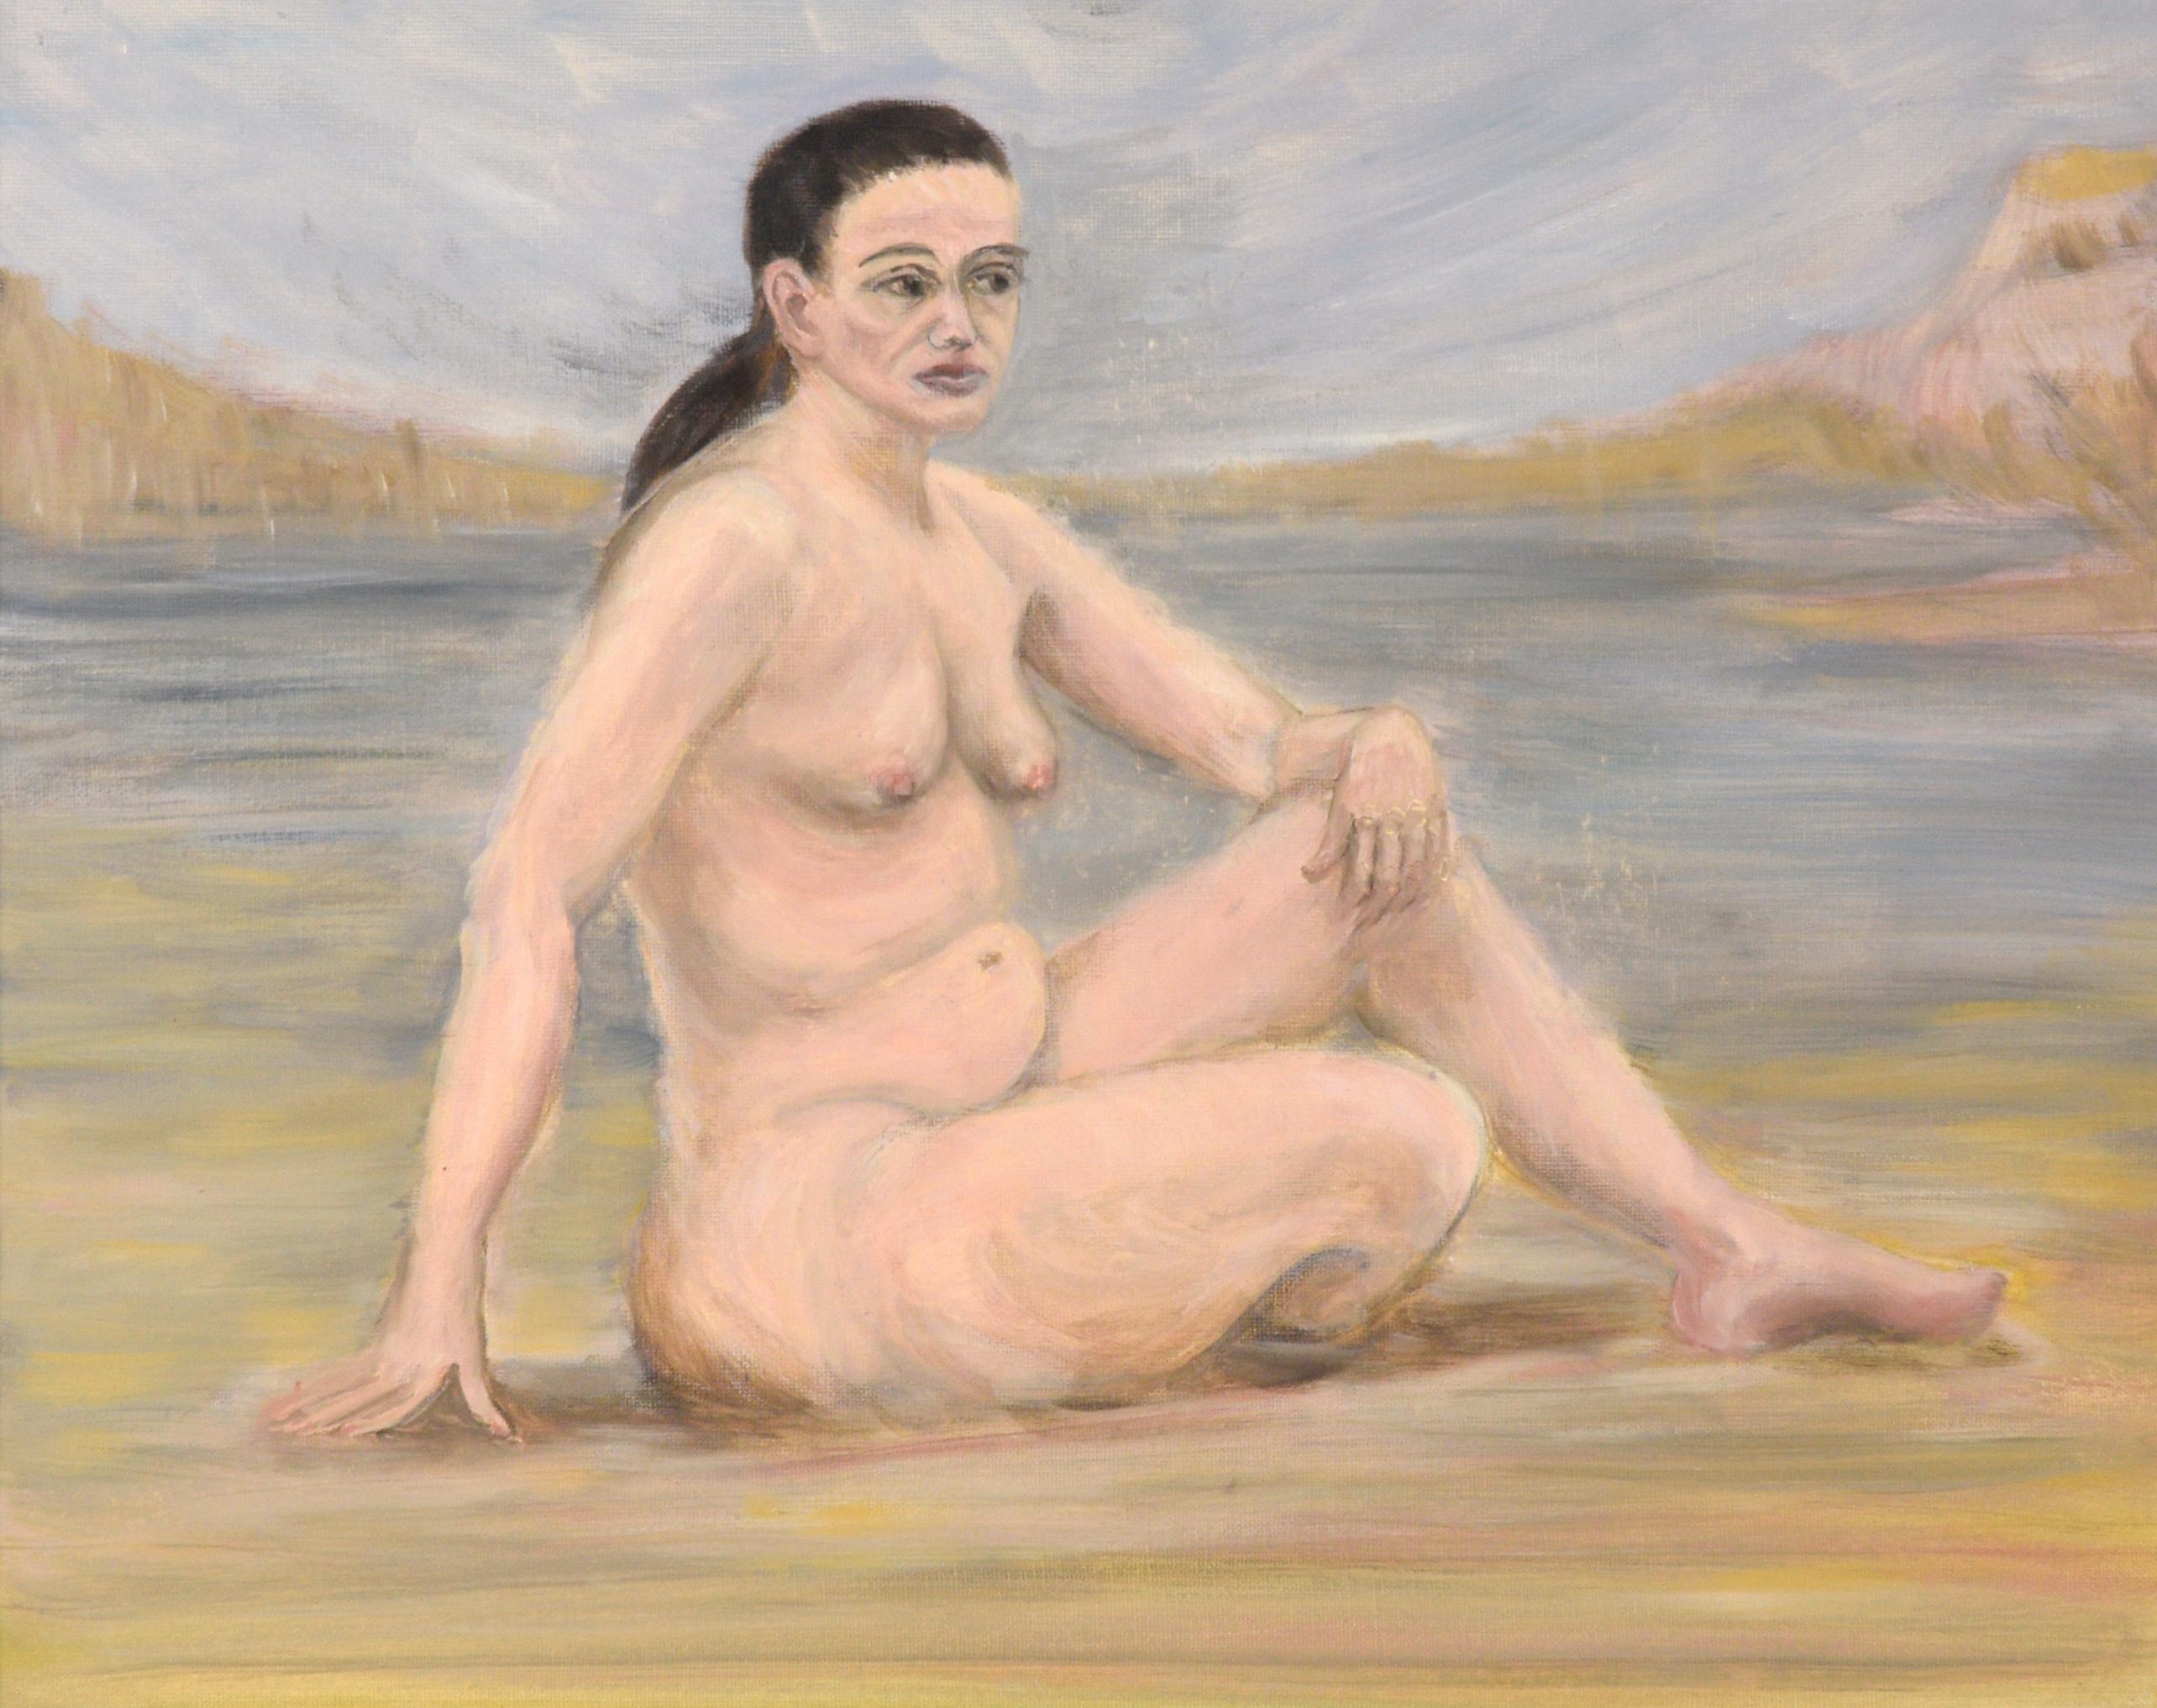 Woman at the Lake, Mid Century Bay Area Nude Figure Study  - Painting by Genevieve Rogers